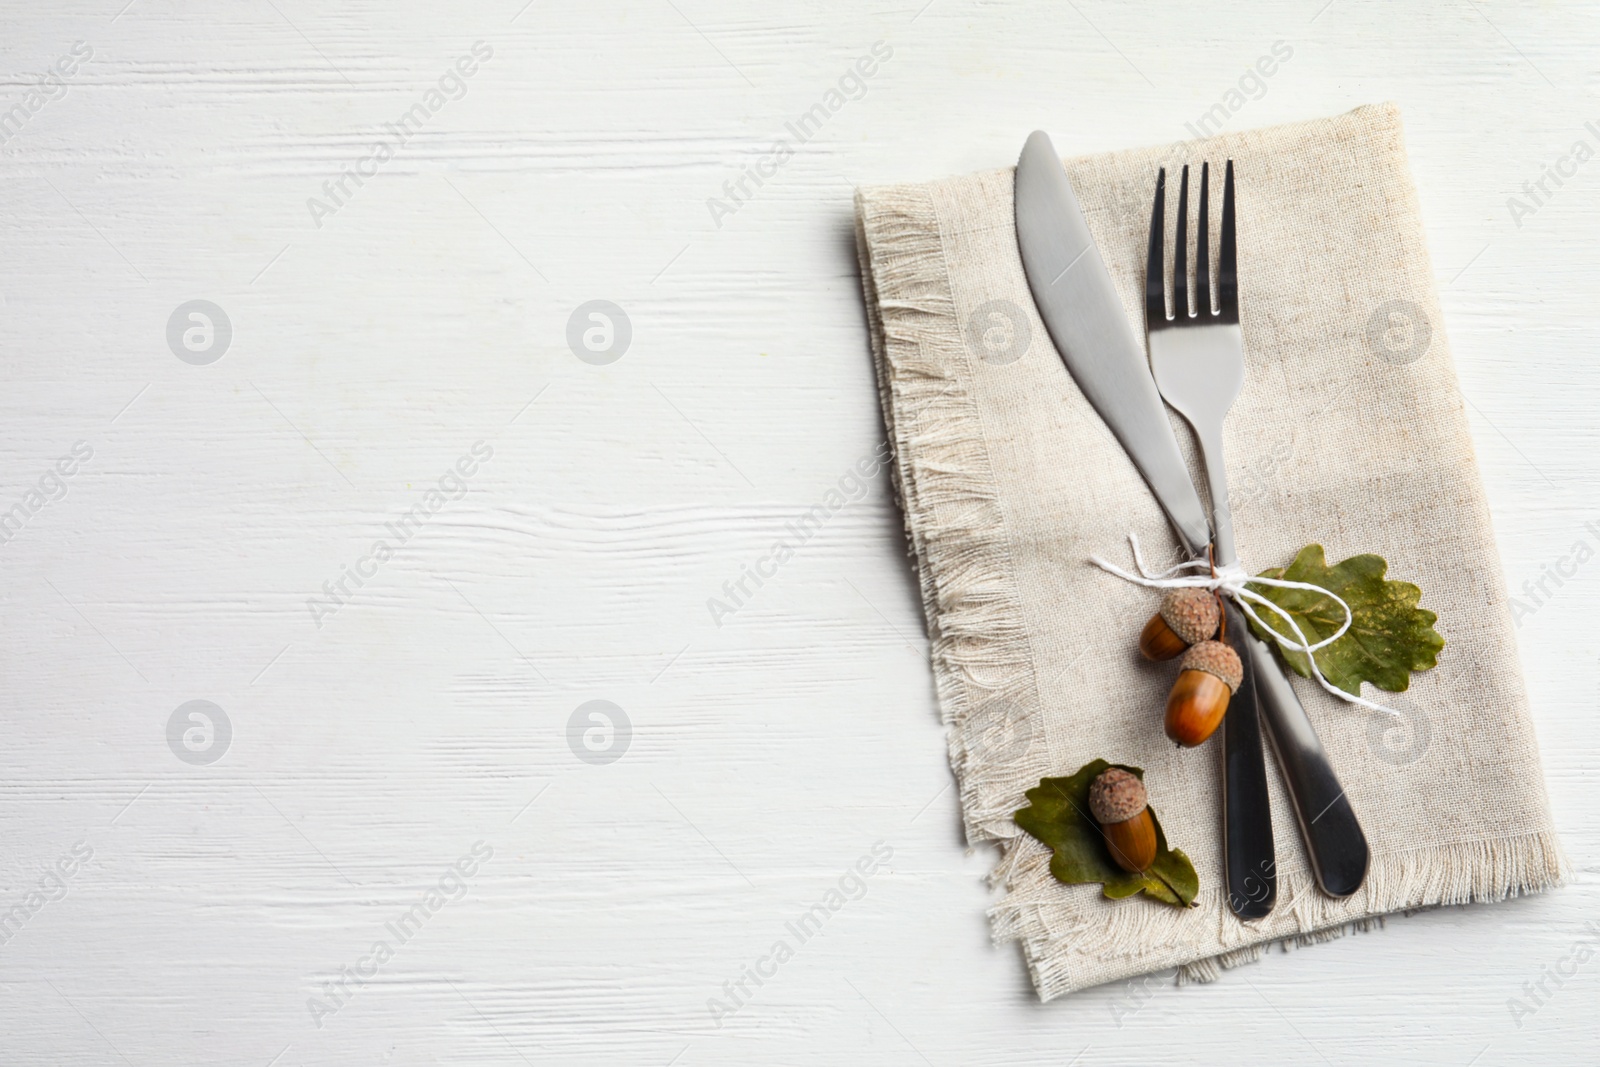 Photo of Cutlery, acorns and dry leaves on white wooden background, flat lay with space for text. Table setting elements